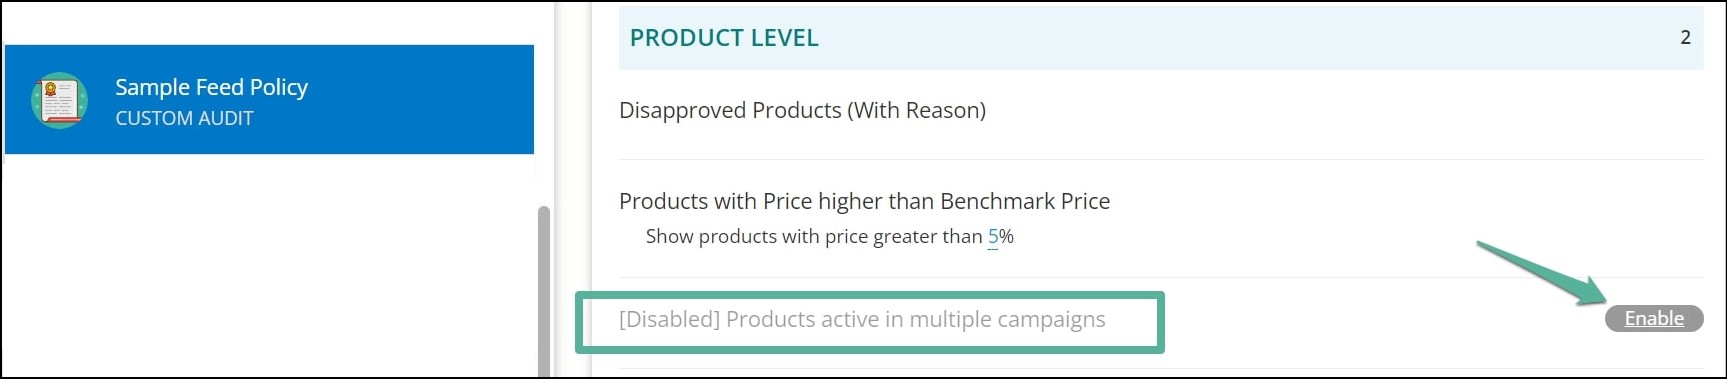 Image 1 - Sample feed policy product level